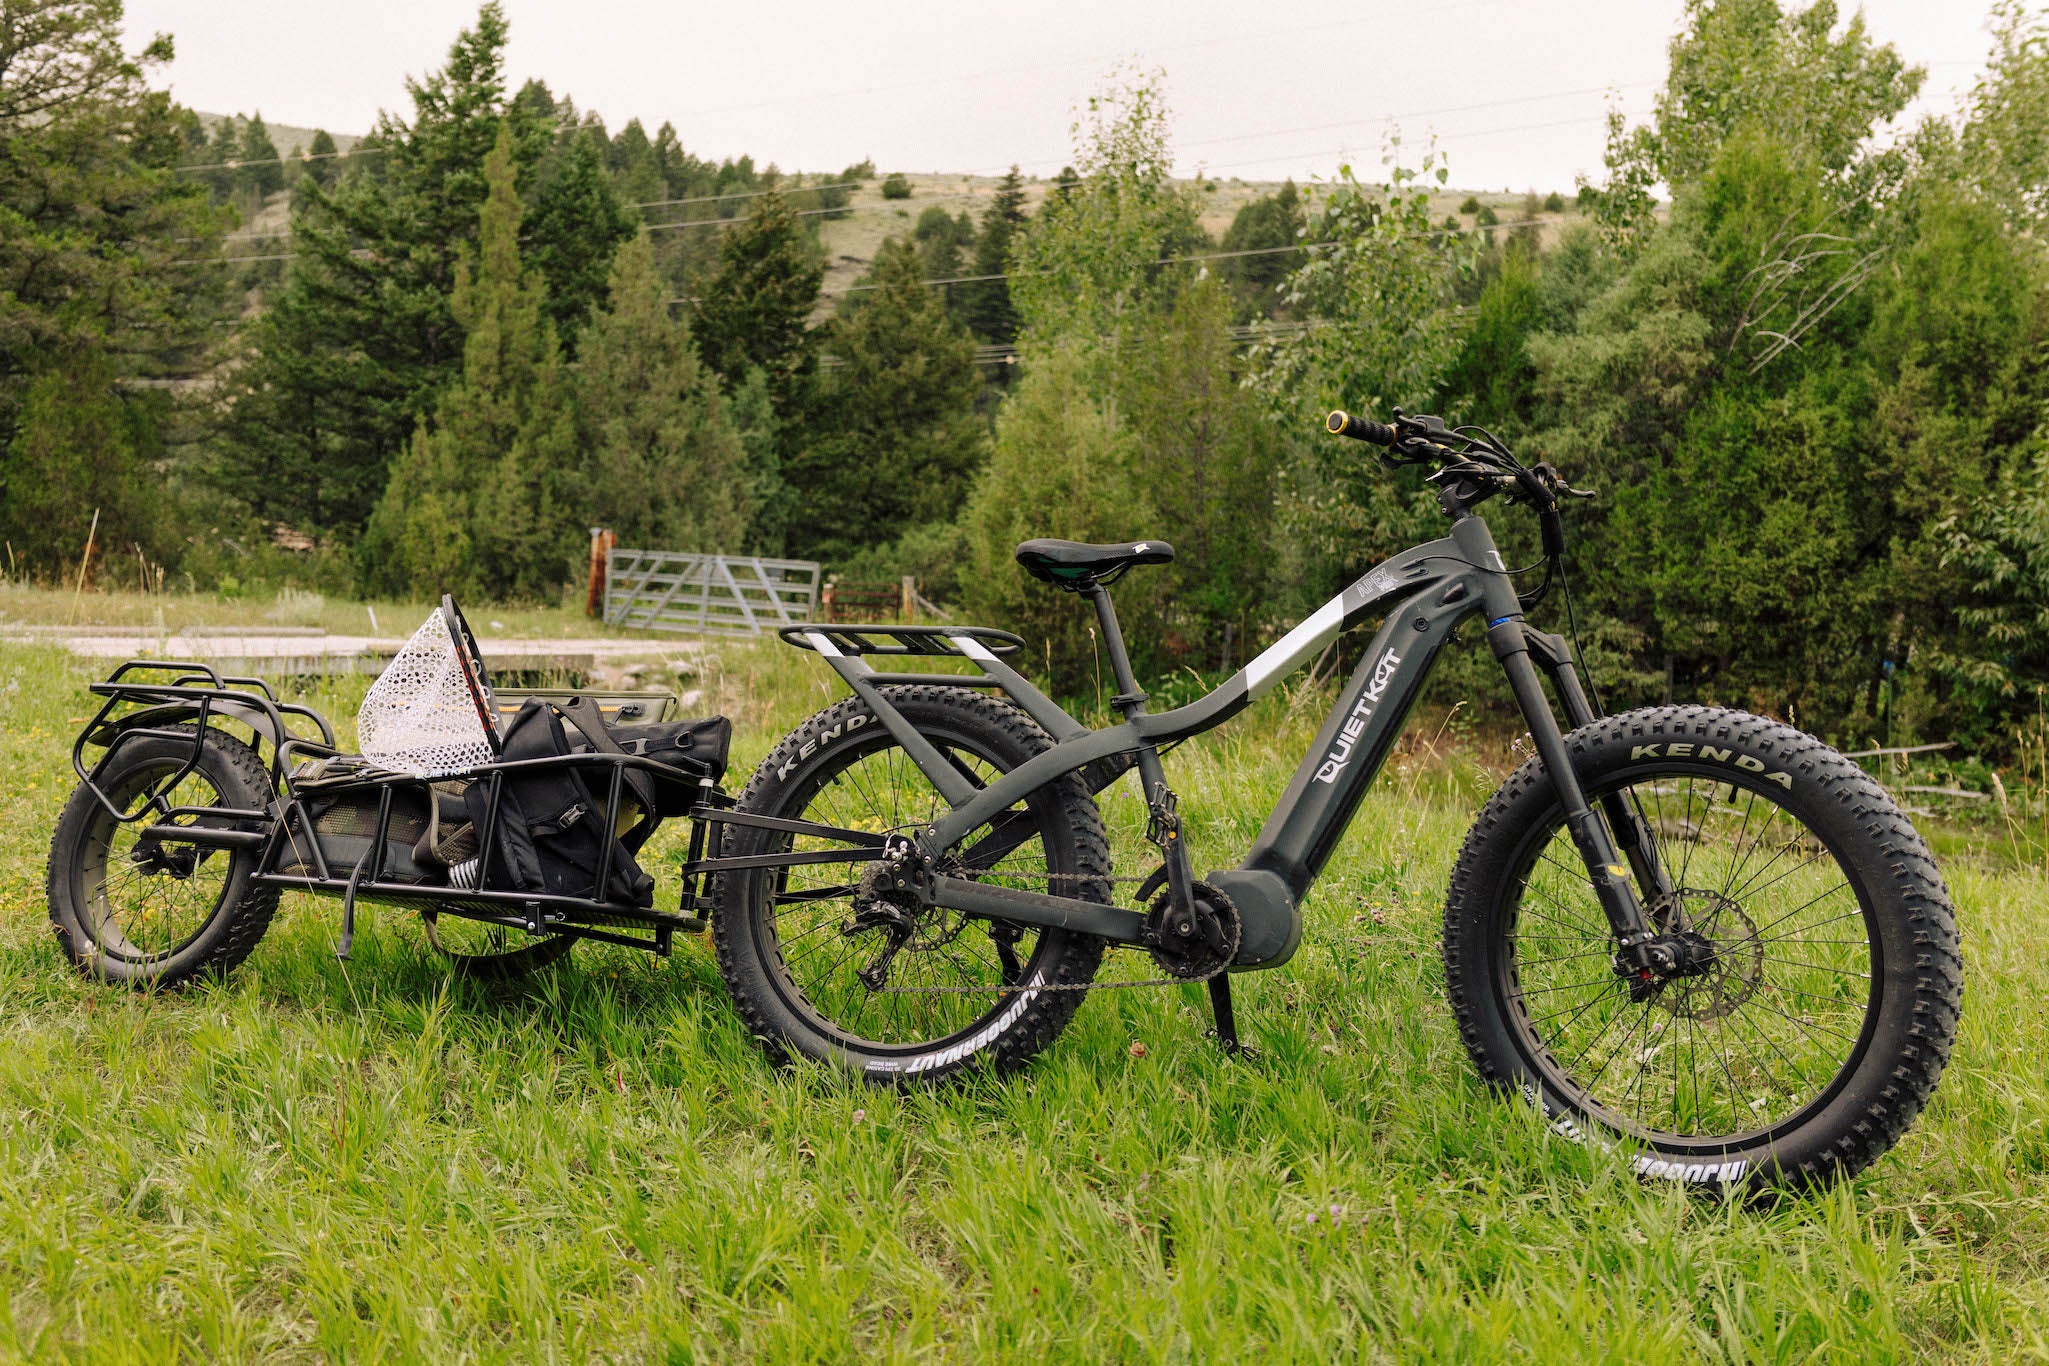 Haul With Ease | The Apex Pro's power, combined with the cargo capacity of the single-wheel trailer, removes any limitations from your adventures.